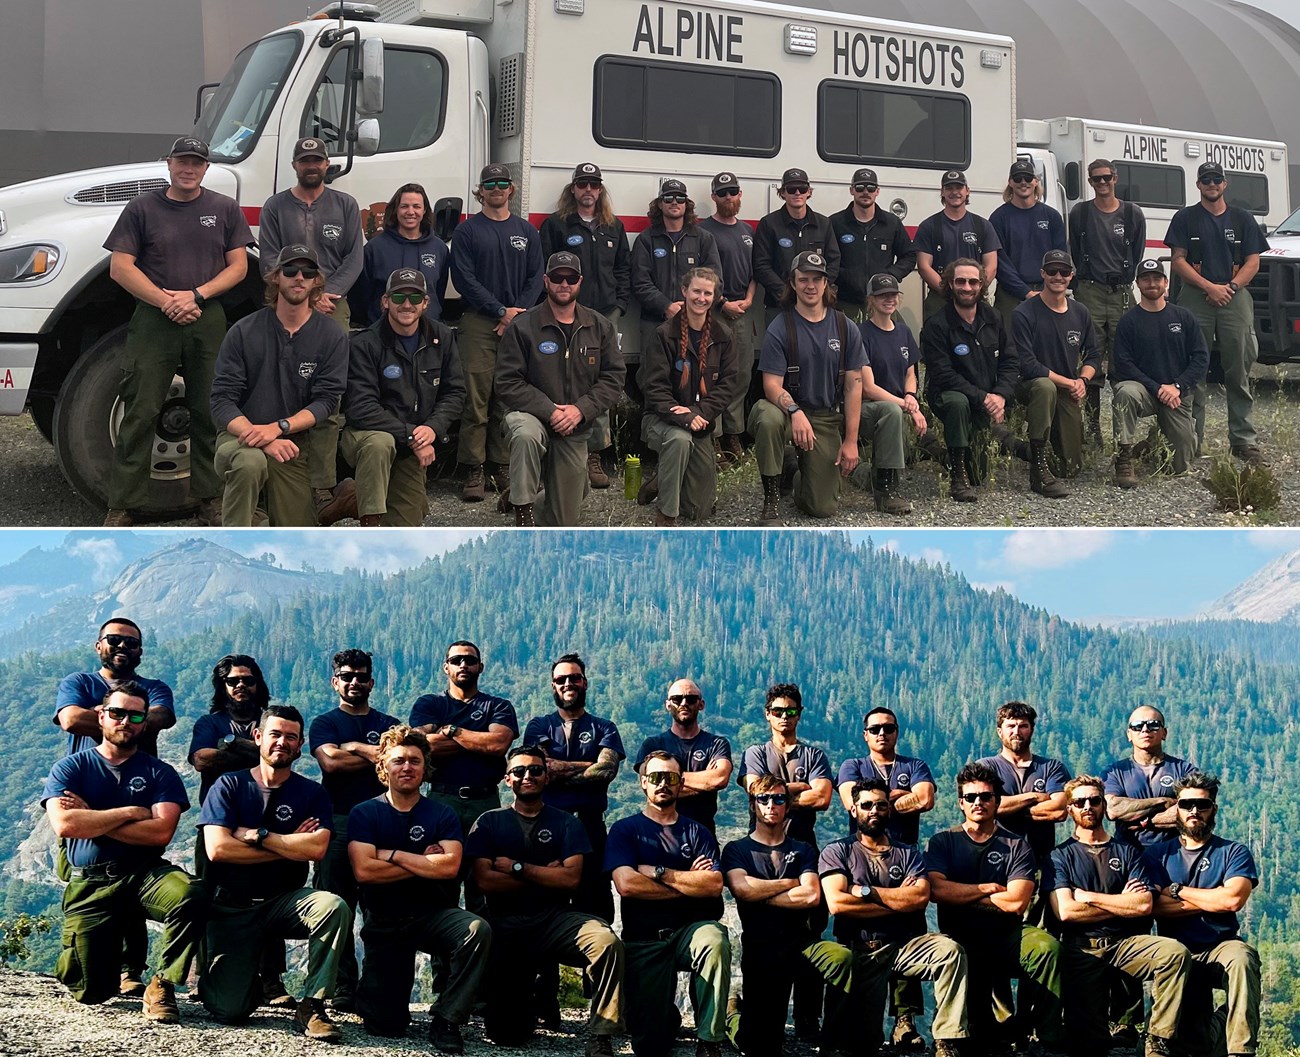 Top: group of men and women that make up the Alpine Hotshots; bottom: group of men that make up the Arrowhead Hotshots.